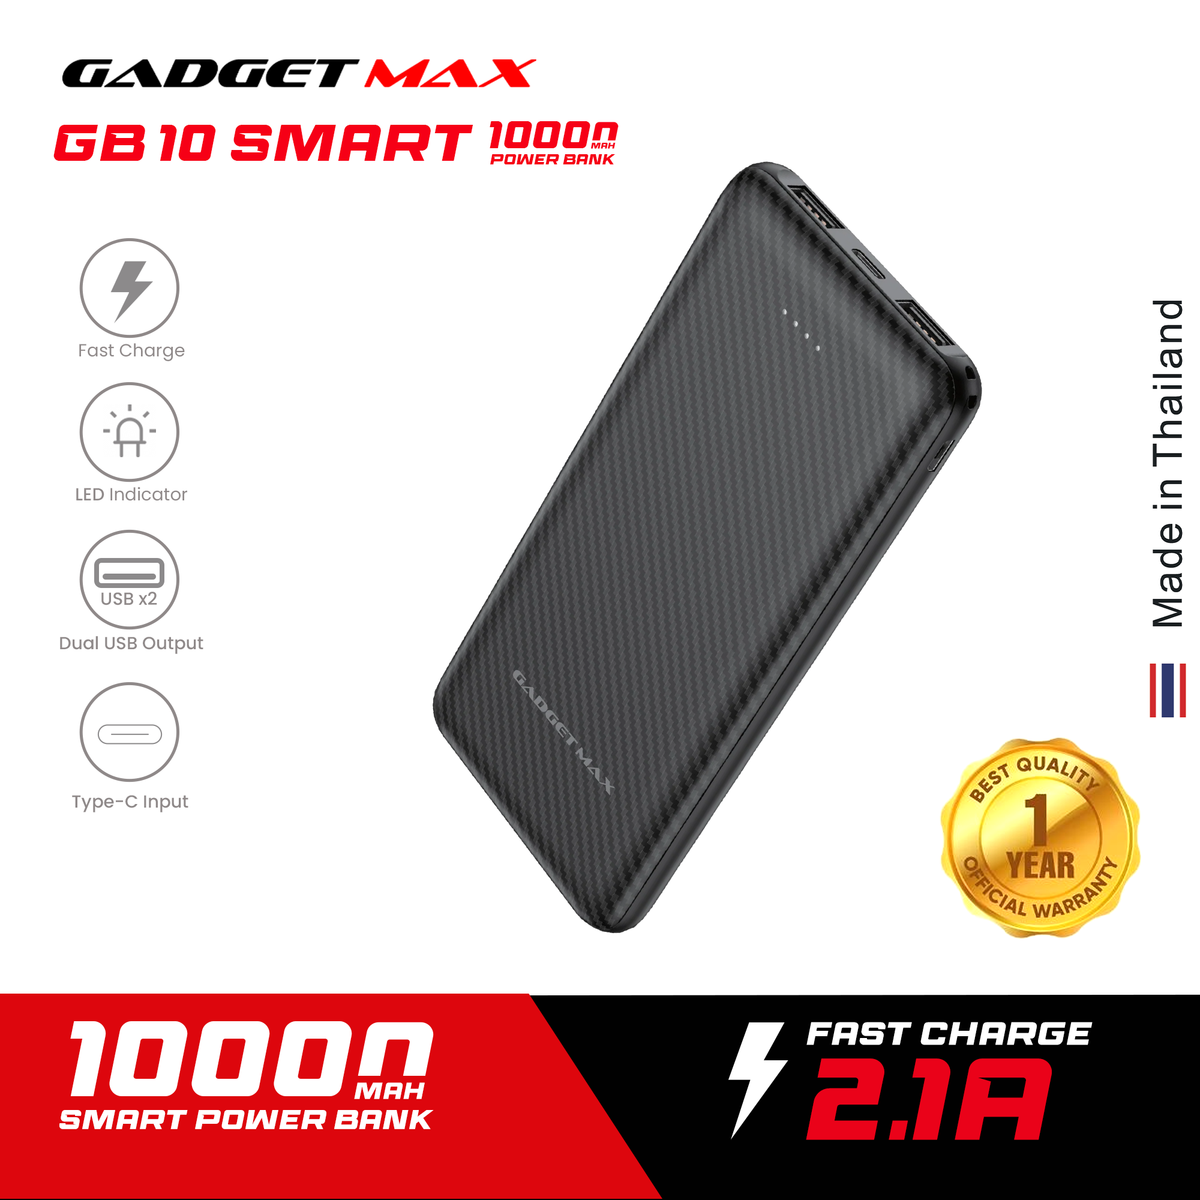 GADGET MAX GB10 10000mAh SMART 2.1A  POWER BANK (5V/2.1A)|(OUTPUT-2USB/INPUT-MICRO,TYPE-C), 10000 mAh Power Bank, Power Bank for All, Android Power Bank